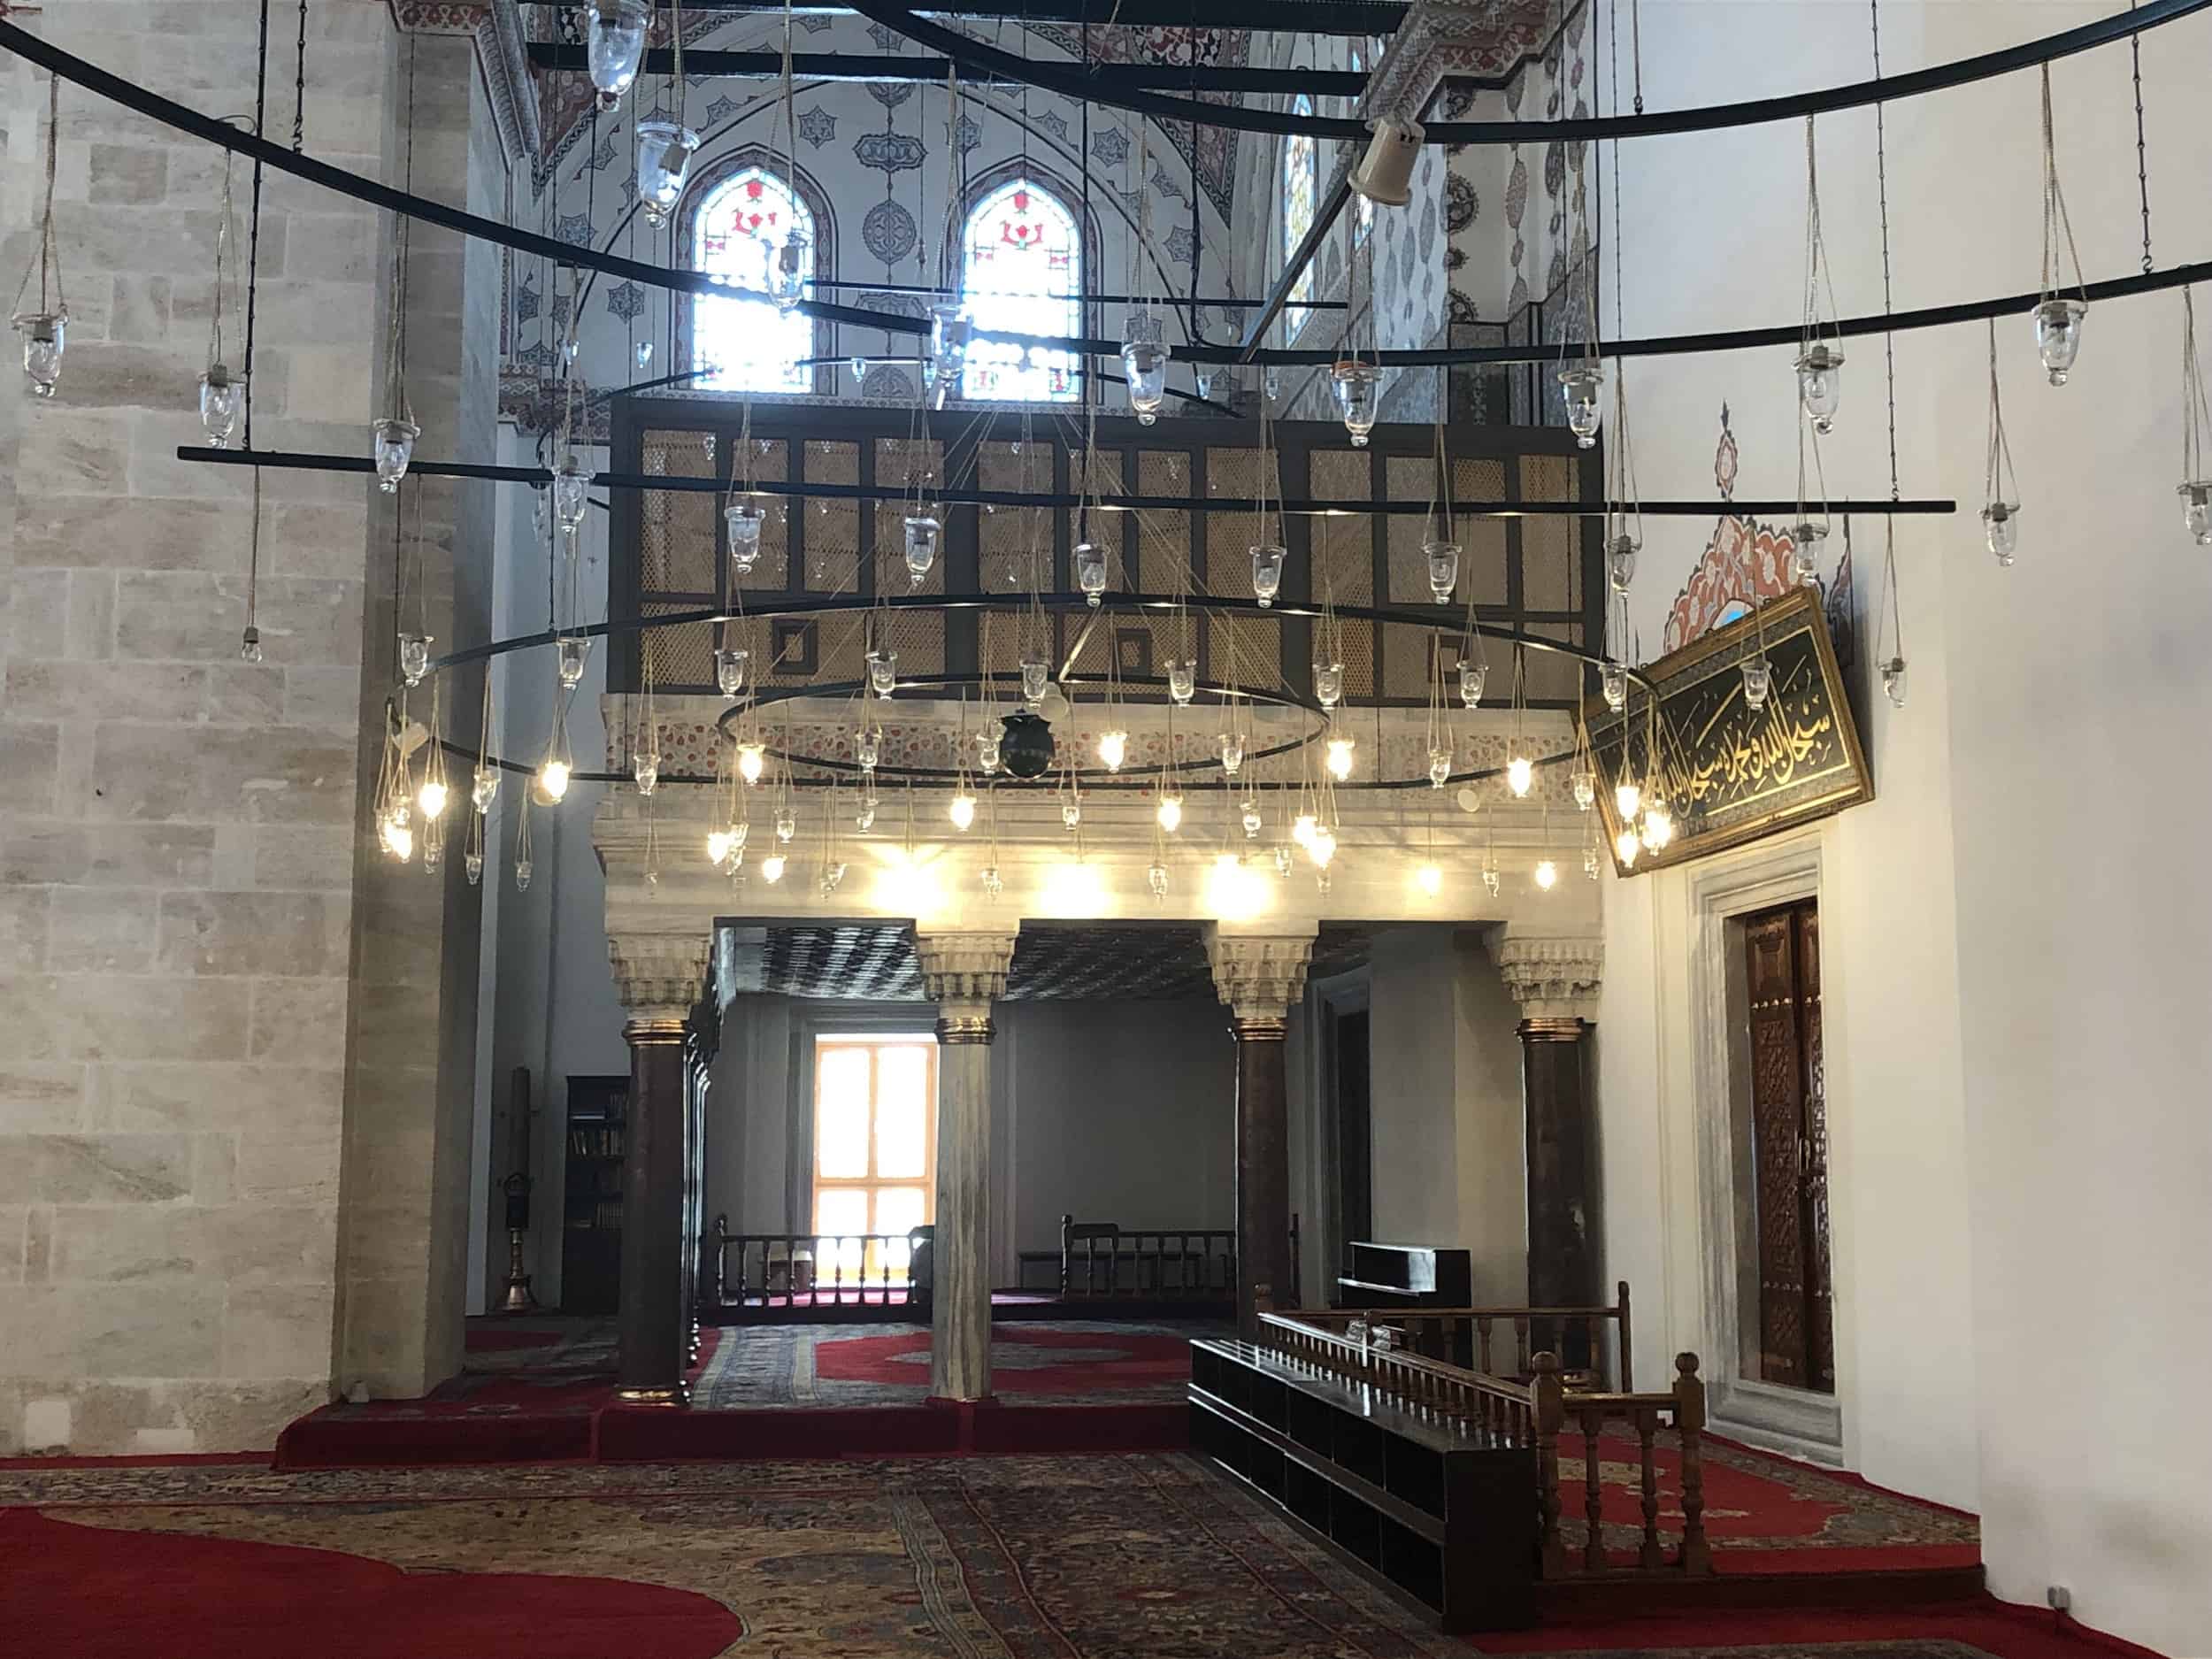 Sultan's loge of the Bayezid II Mosque in Istanbul, Turkey